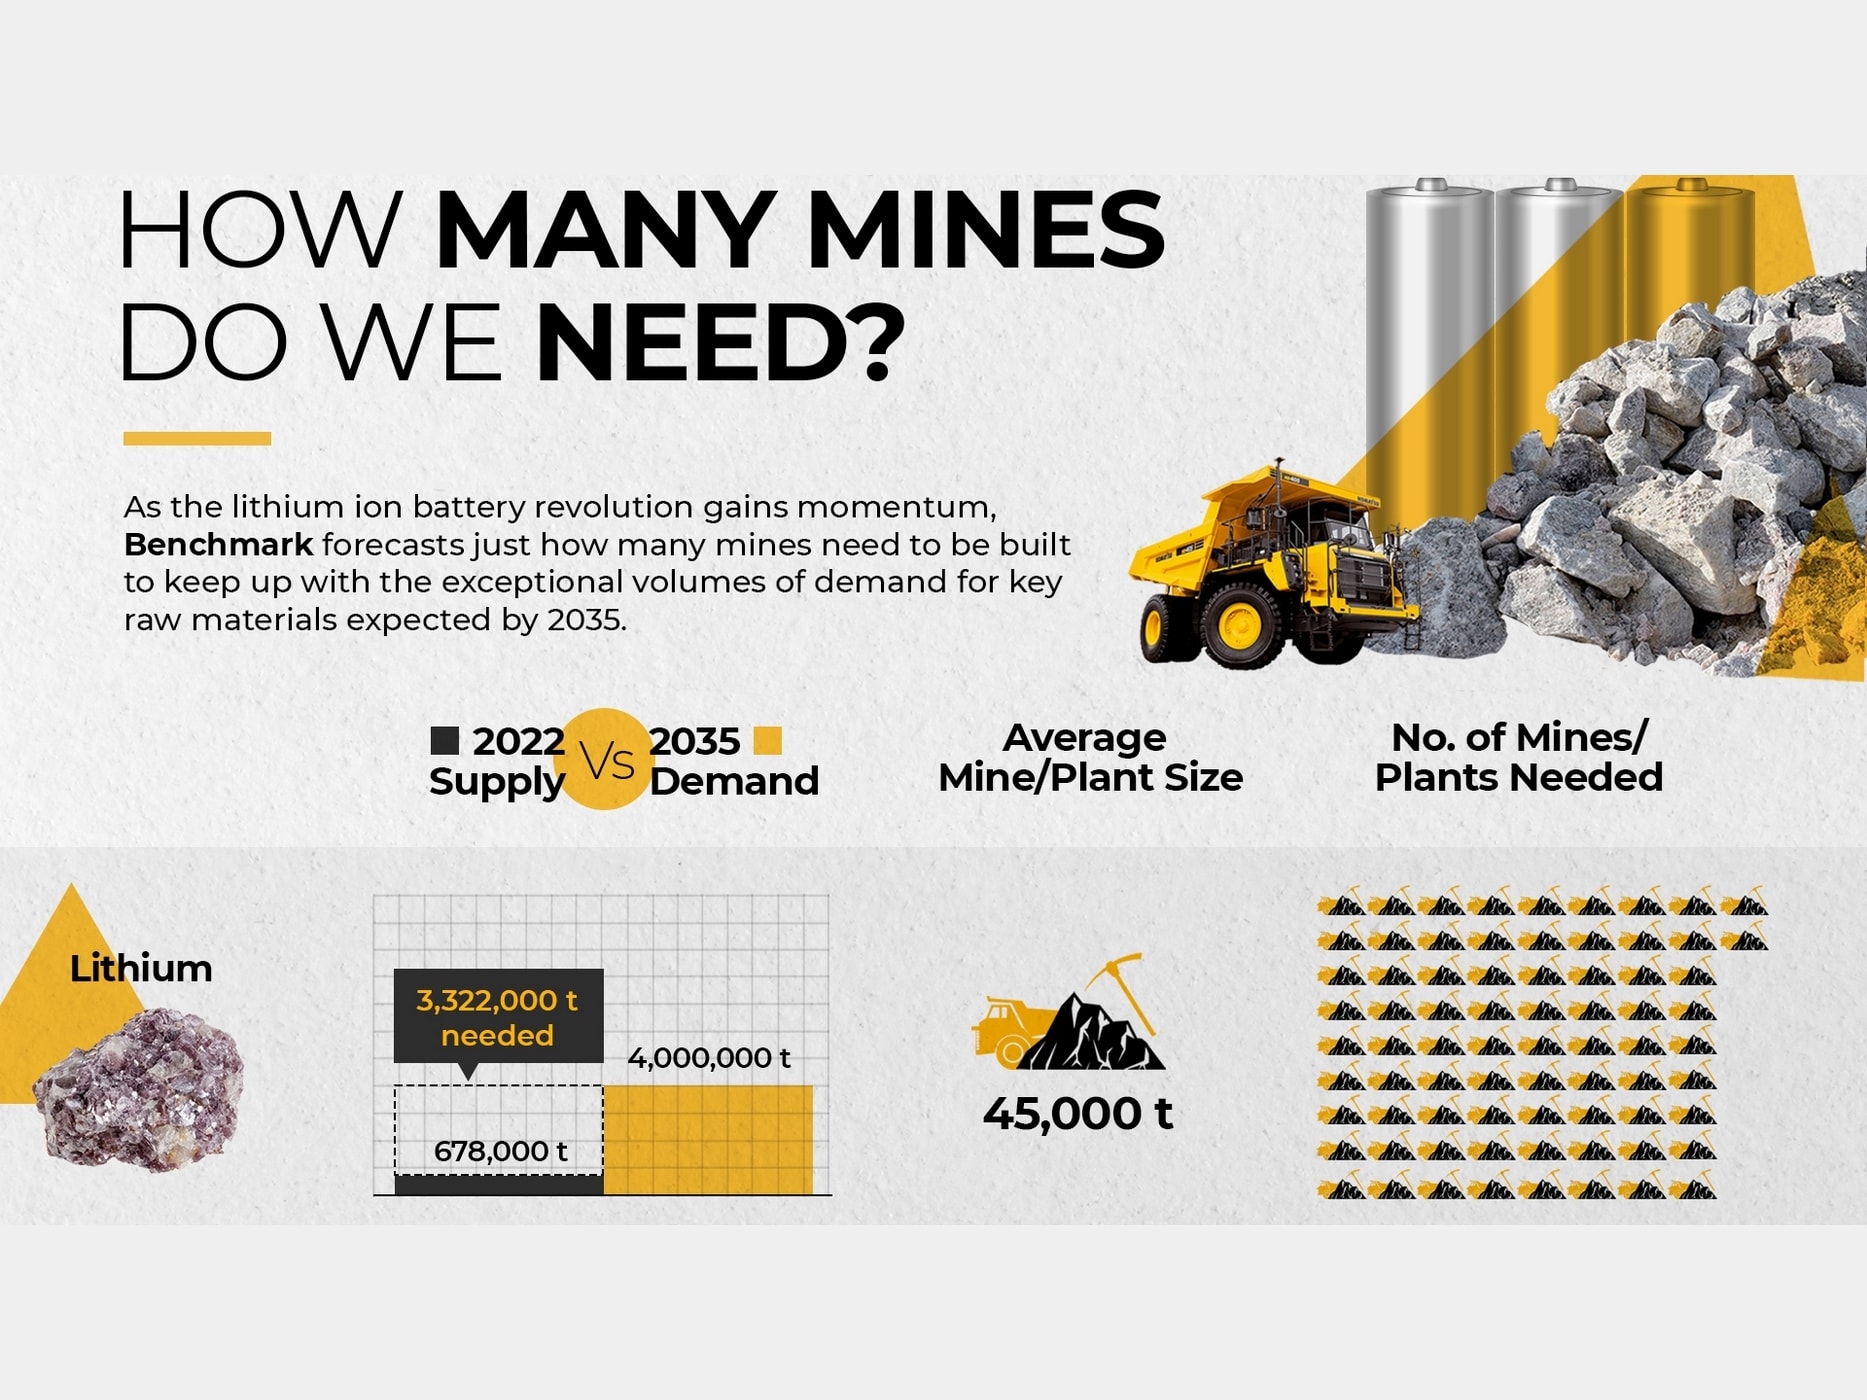 How can we get enough minerals for EVs without…